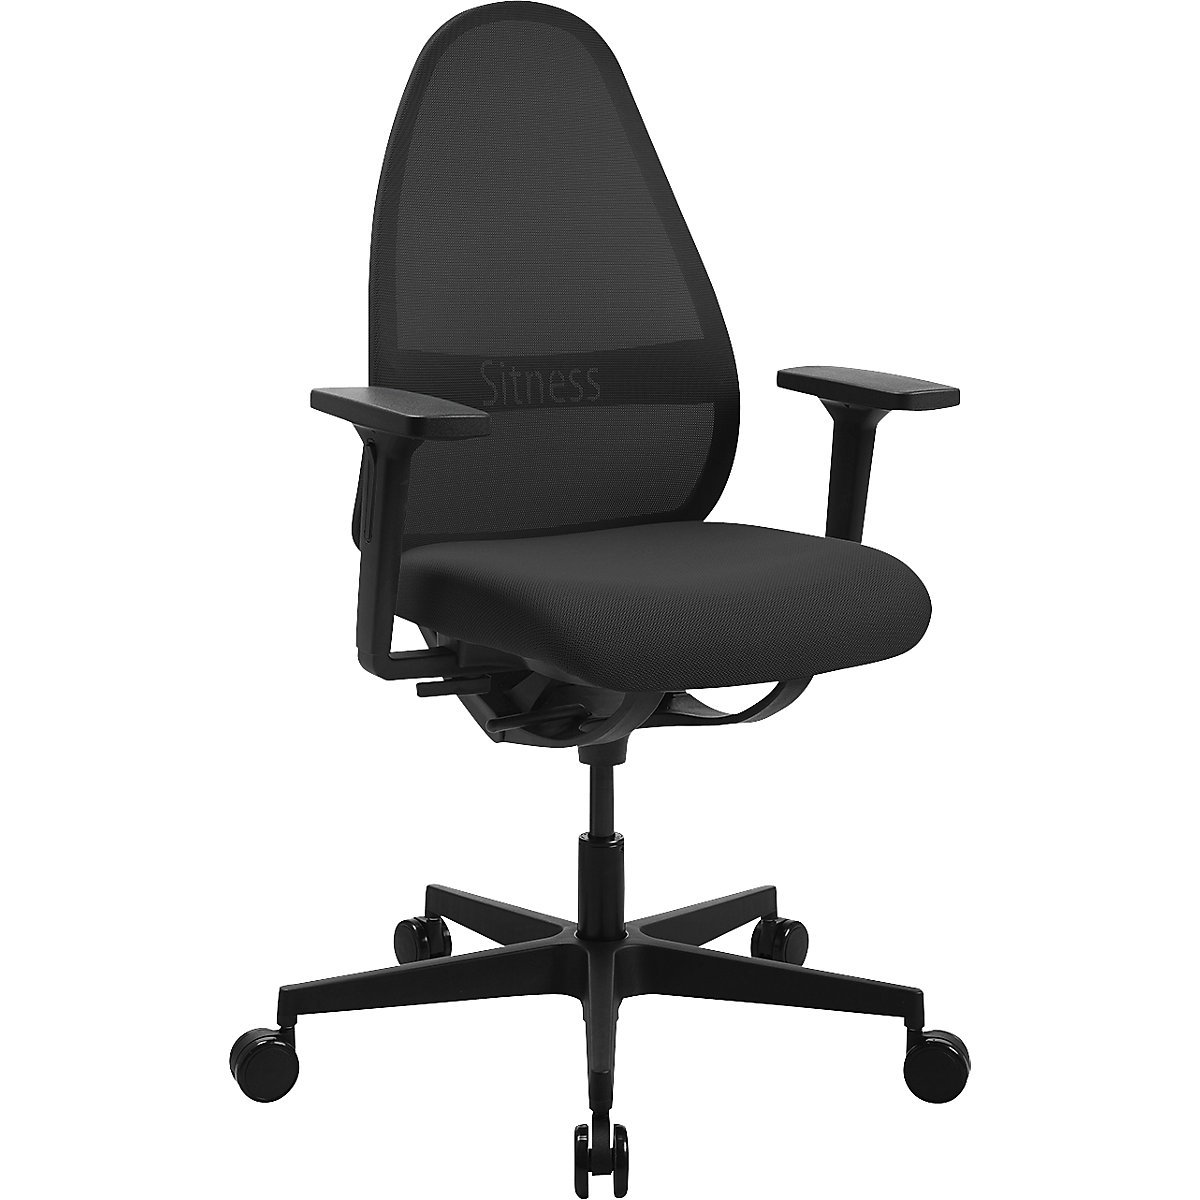 SOFT SITNESS ART office swivel chair – Topstar, synchronous mechanism, with arm rests, black-1